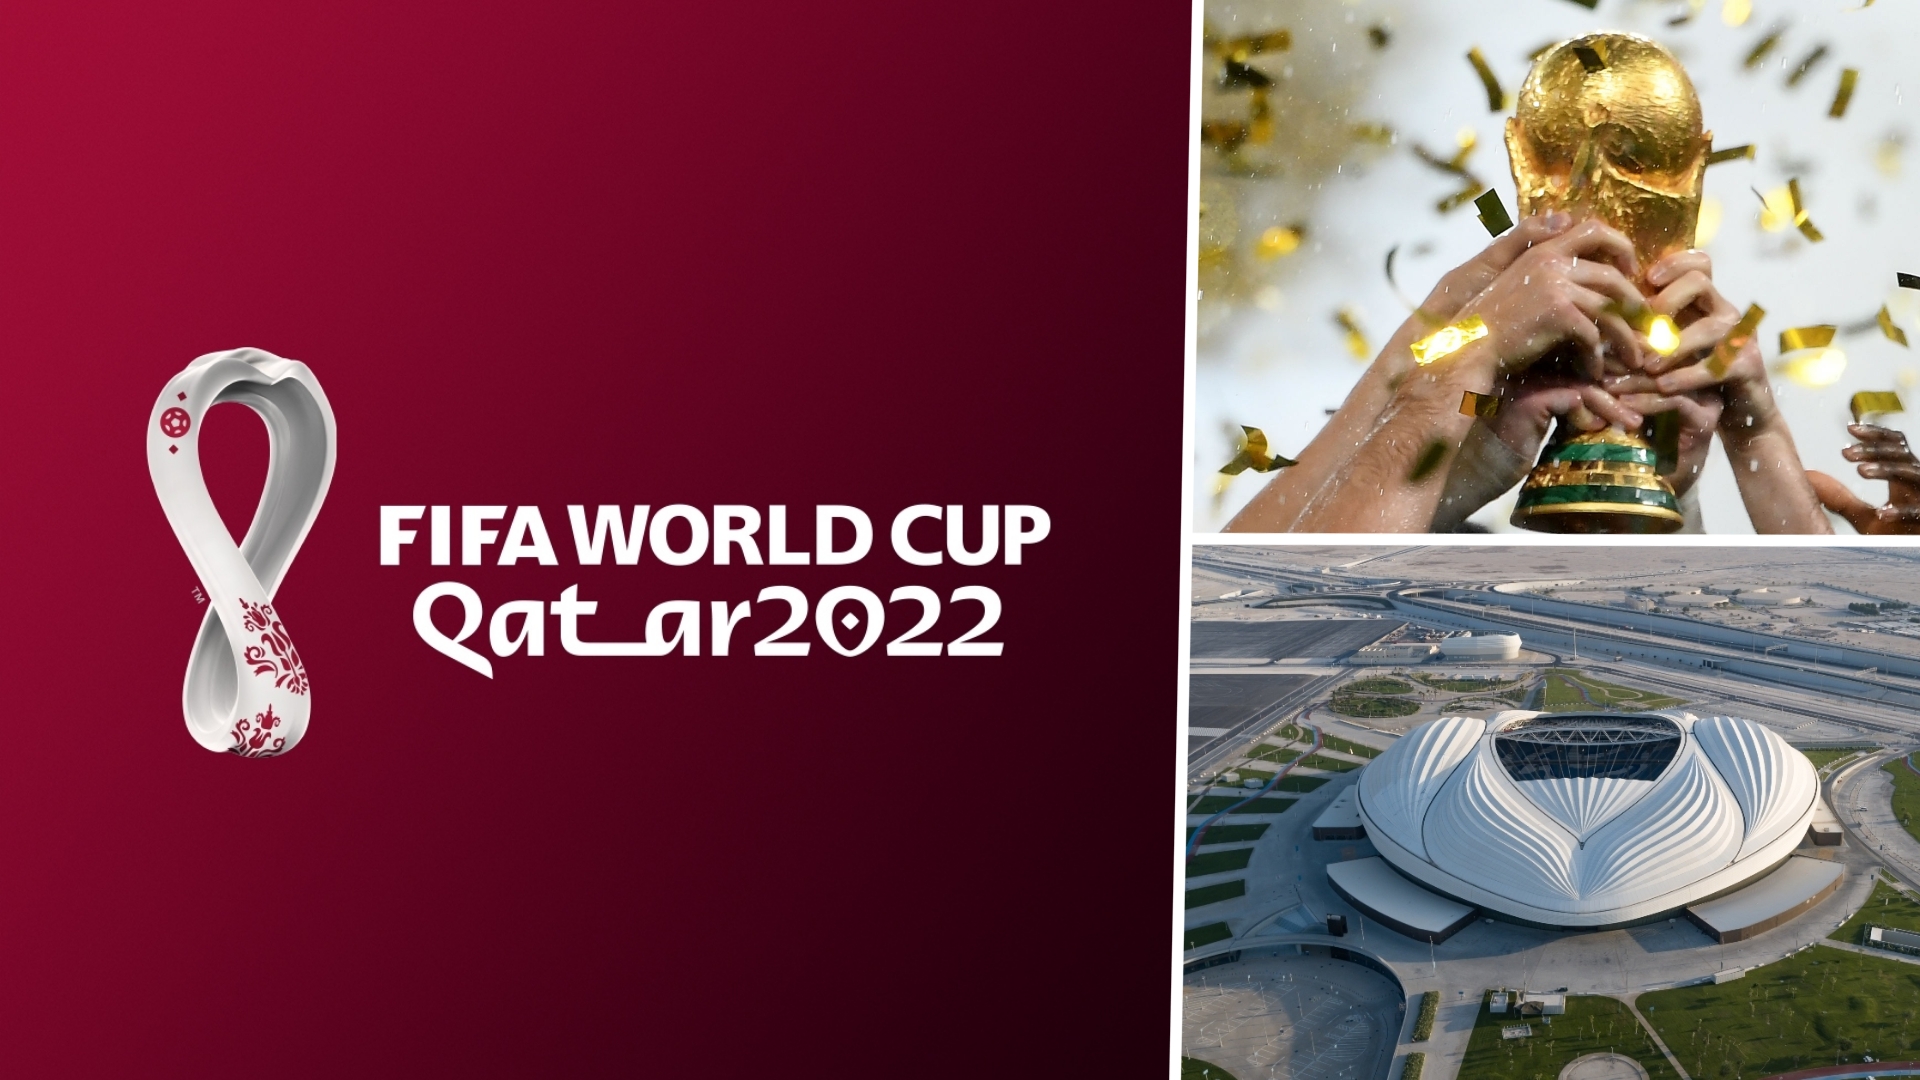 2022 World Cup: Road To Qatar Begins For European Nations